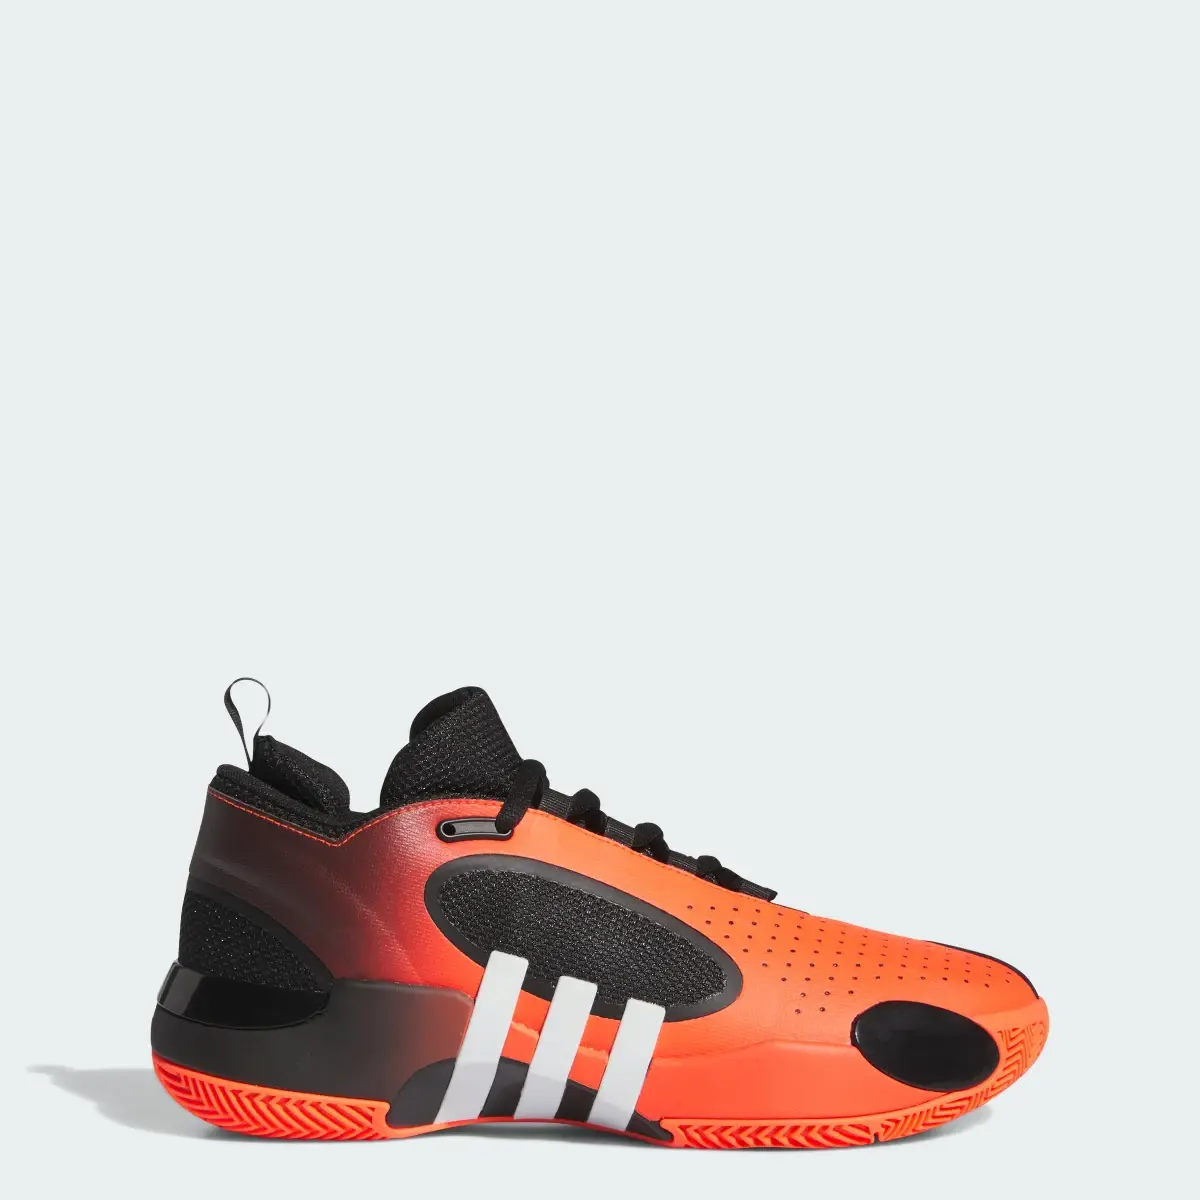 Adidas D.O.N Issue 5 Basketball Shoes. 1